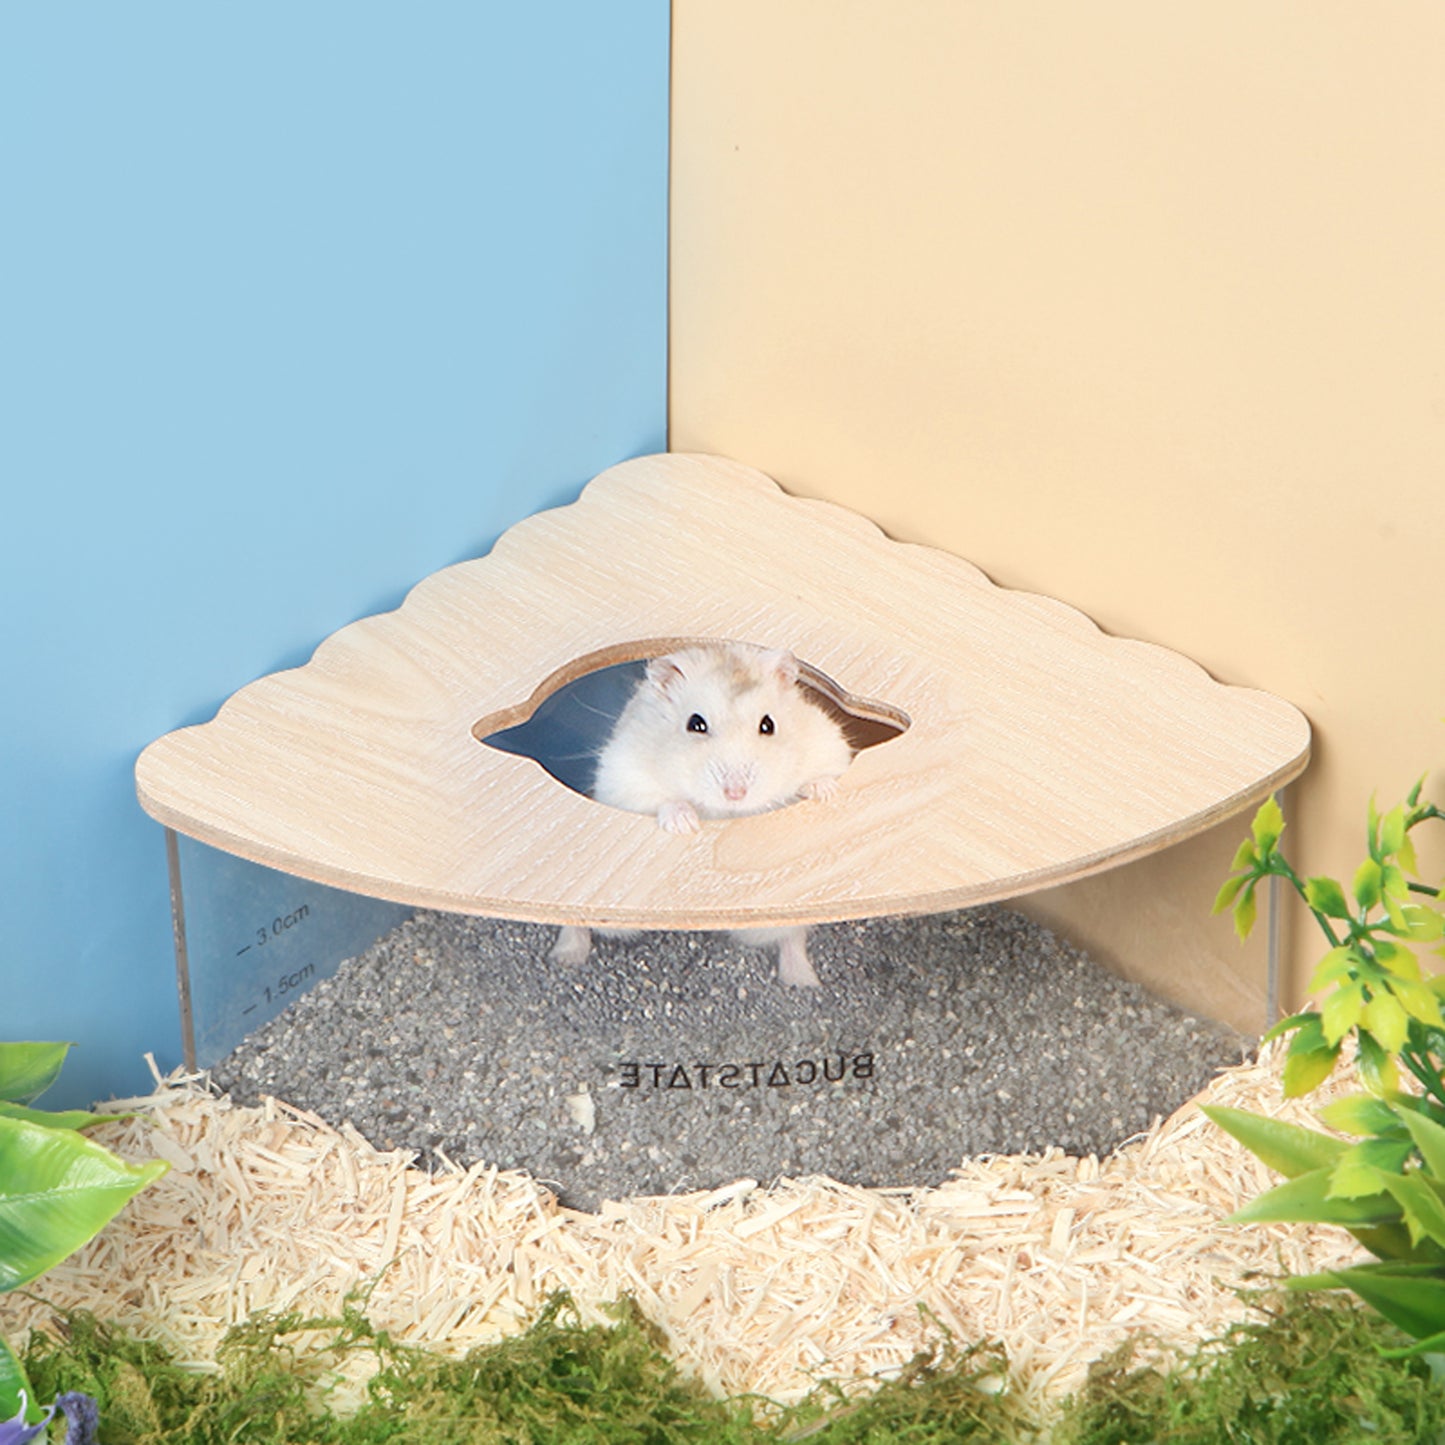 BUCATSTATE Hamster Sand Bath Container Acrylic with Ladder